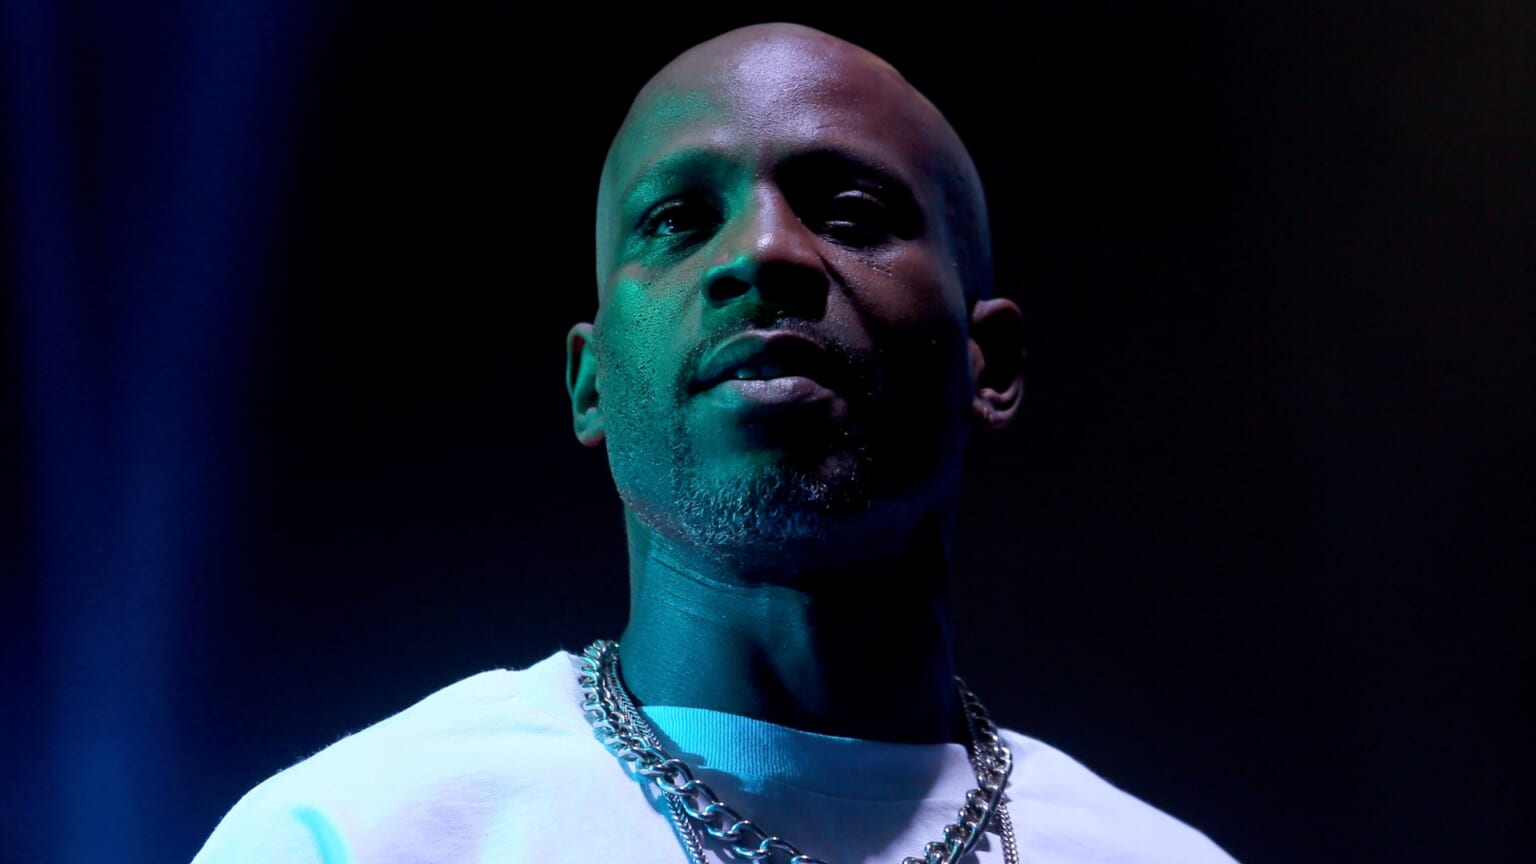 DMX to undergo brain function tests, manager says